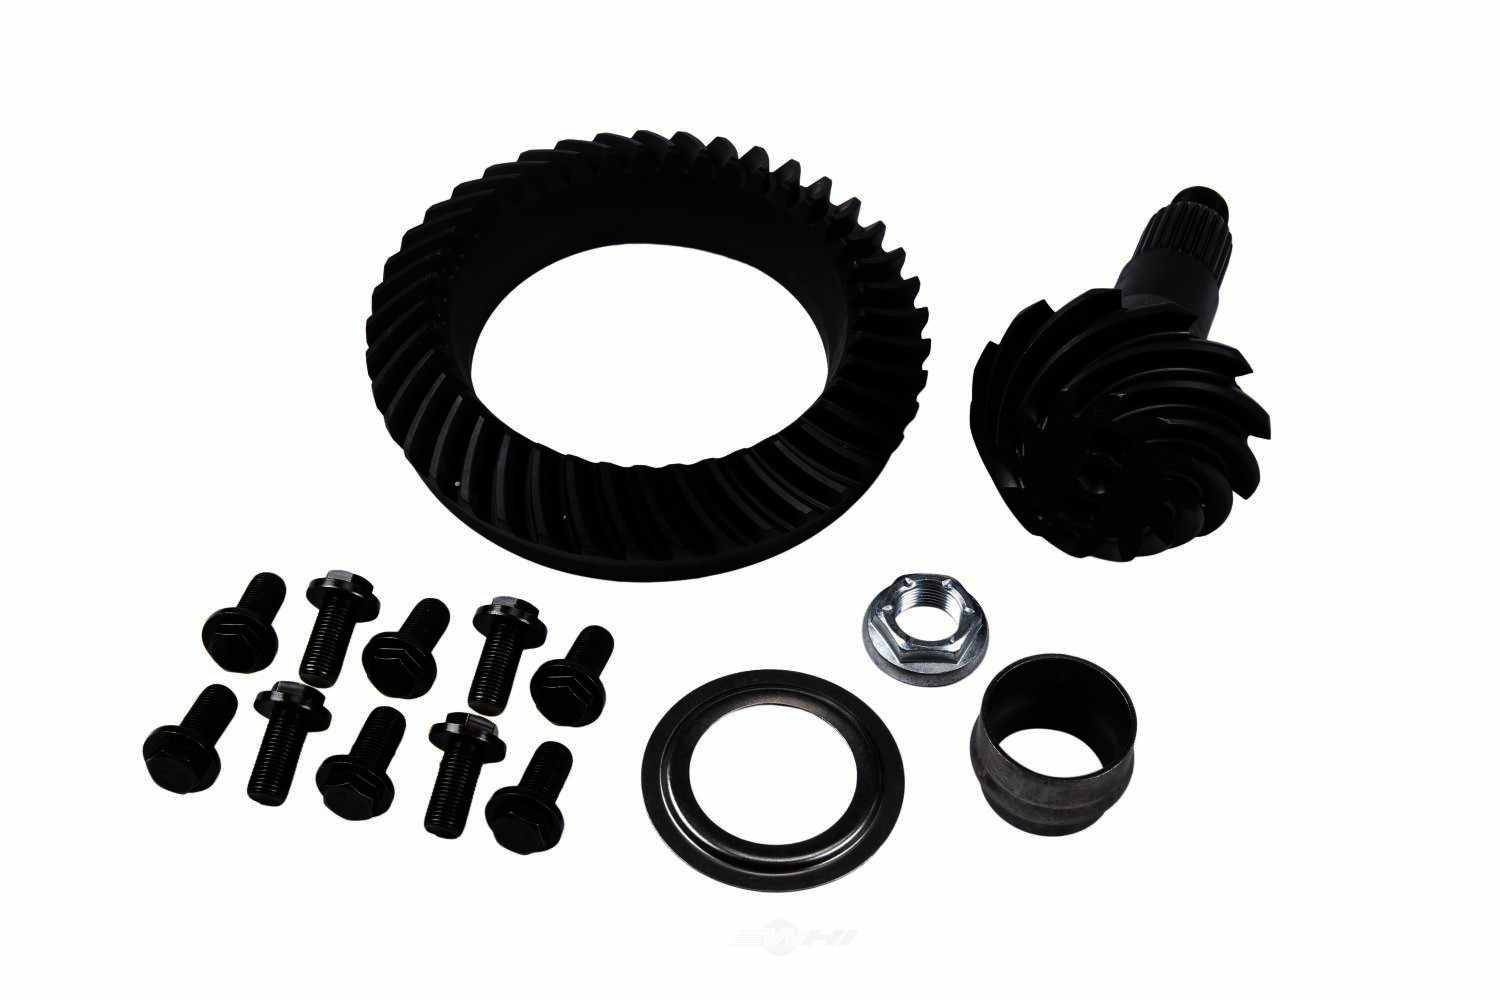 GM GENUINE PARTS - Differential Ring and Pinion - GMP 23471958